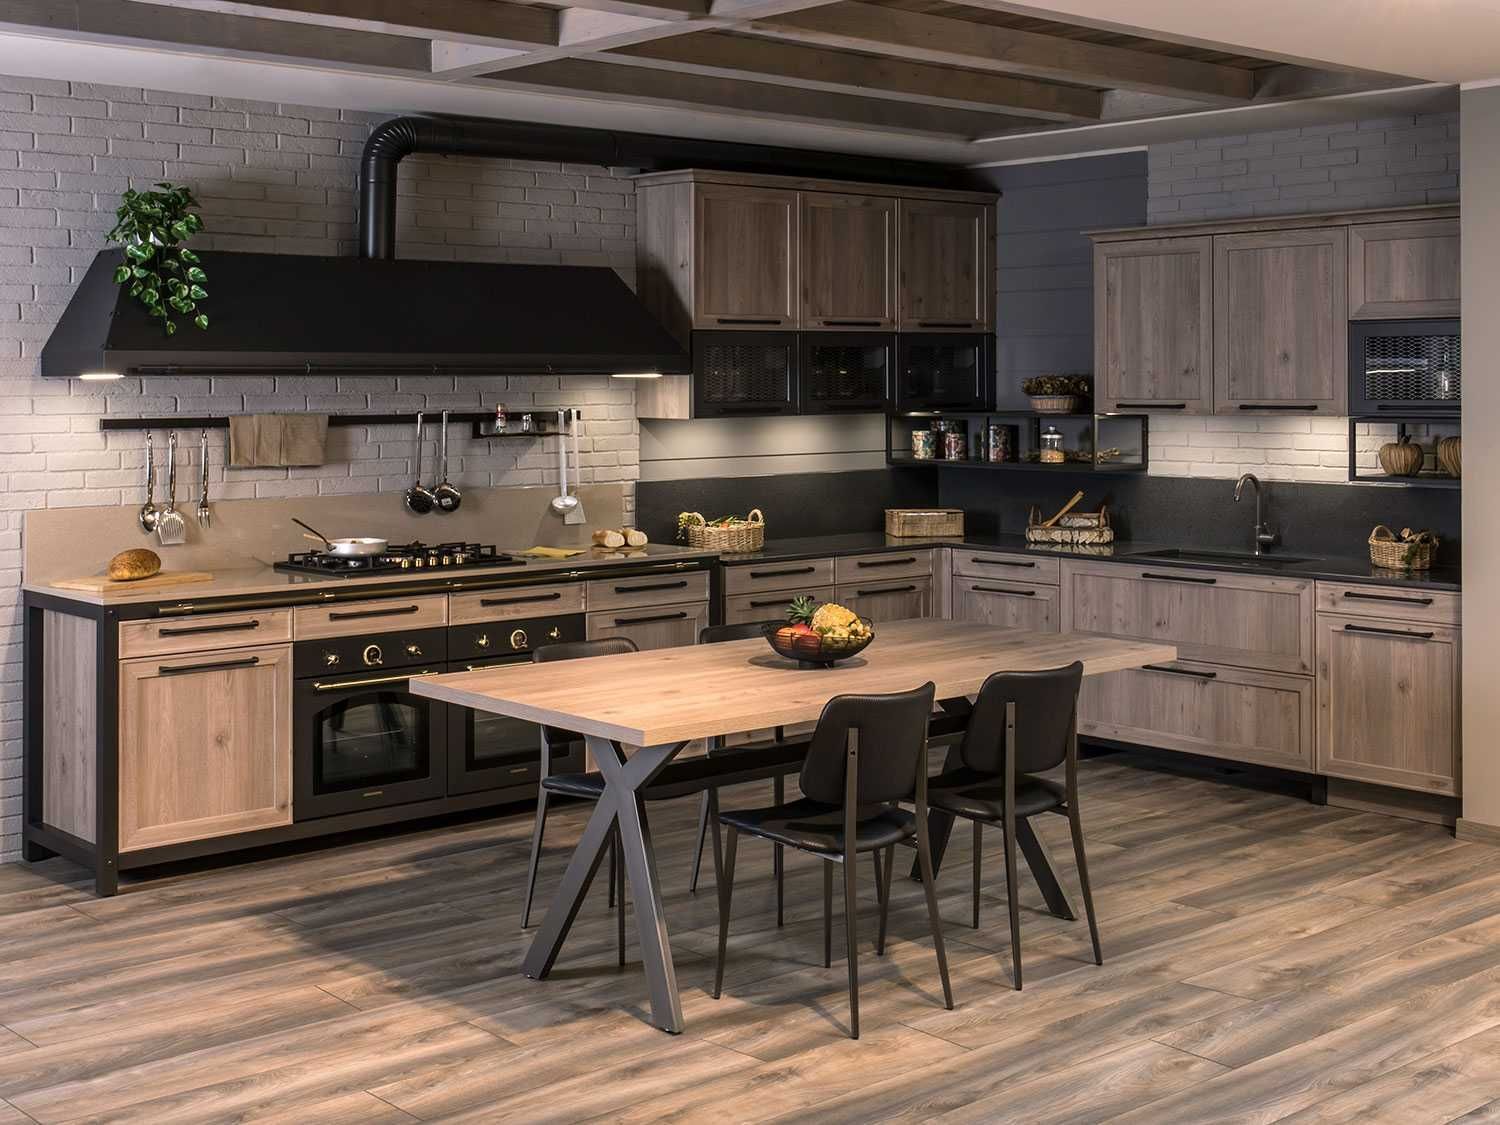 cucina in legno stile industrial chic sixty 06